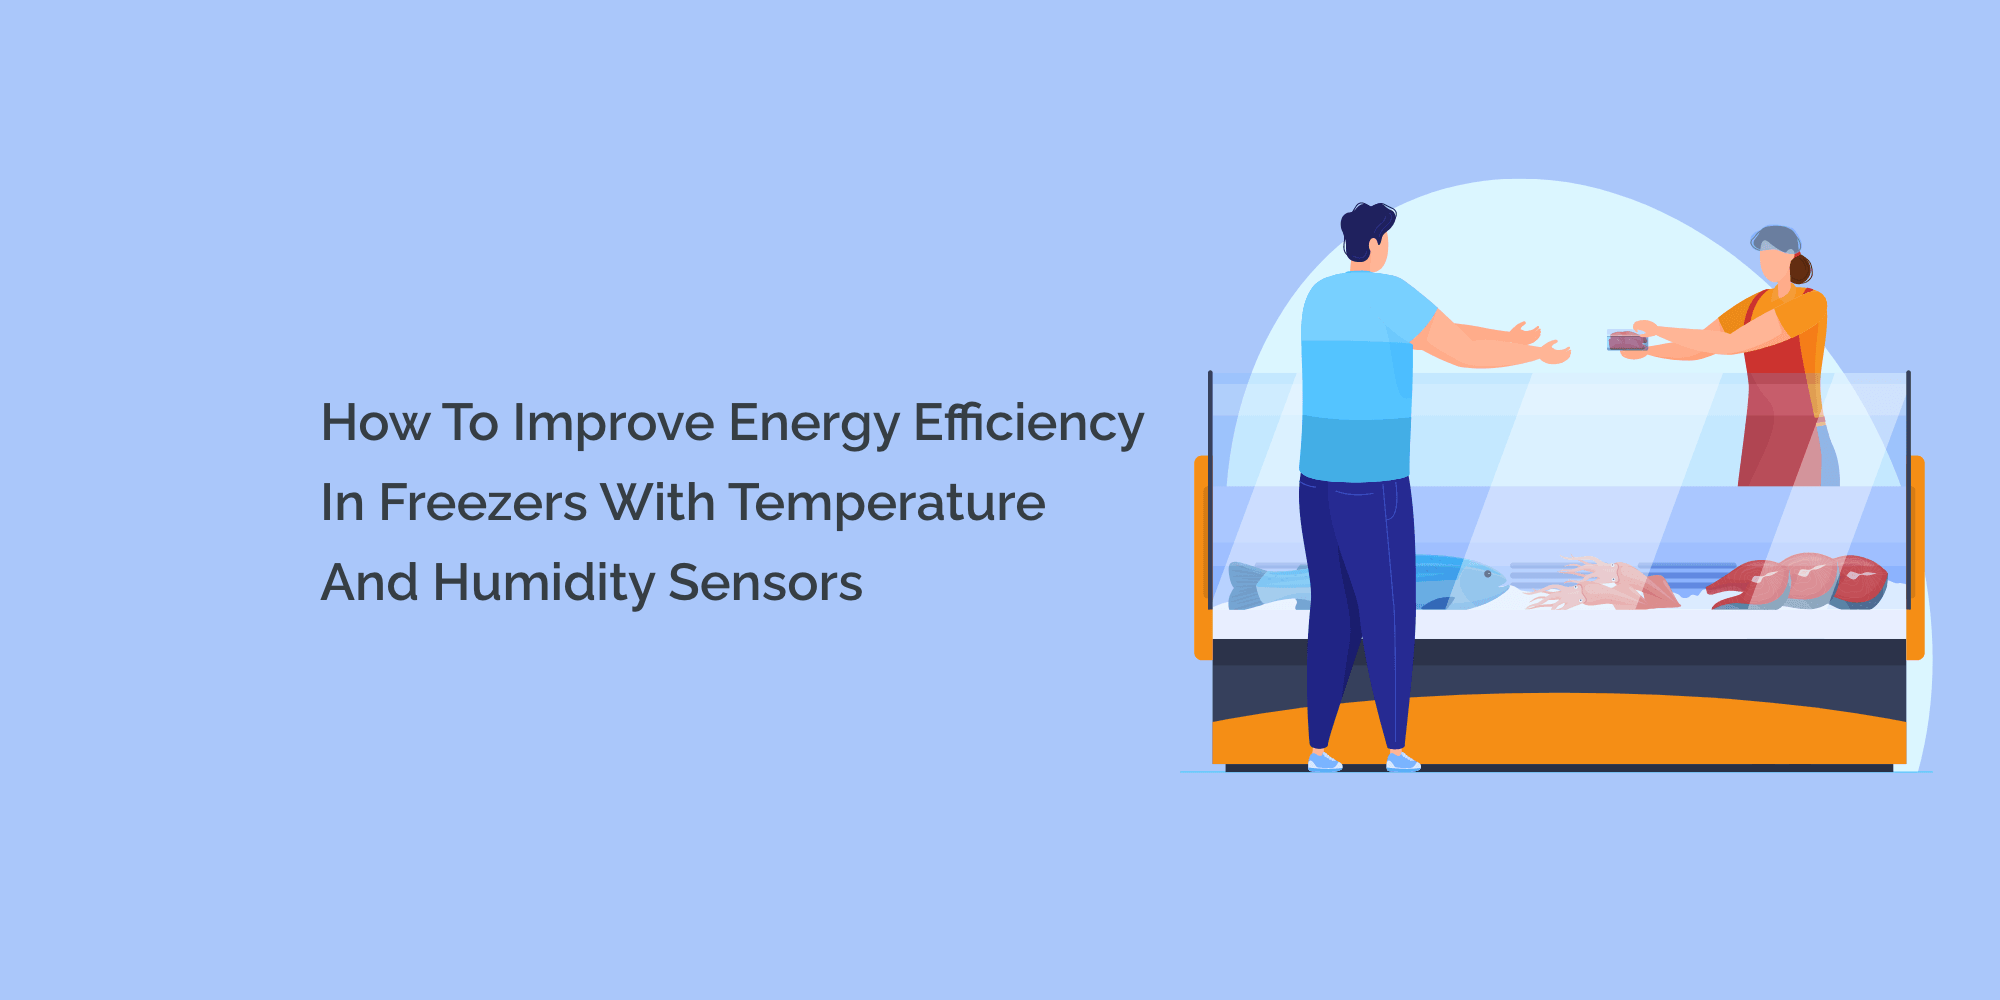 How to Improve Energy Efficiency in Freezers with Temperature and Humidity Sensors